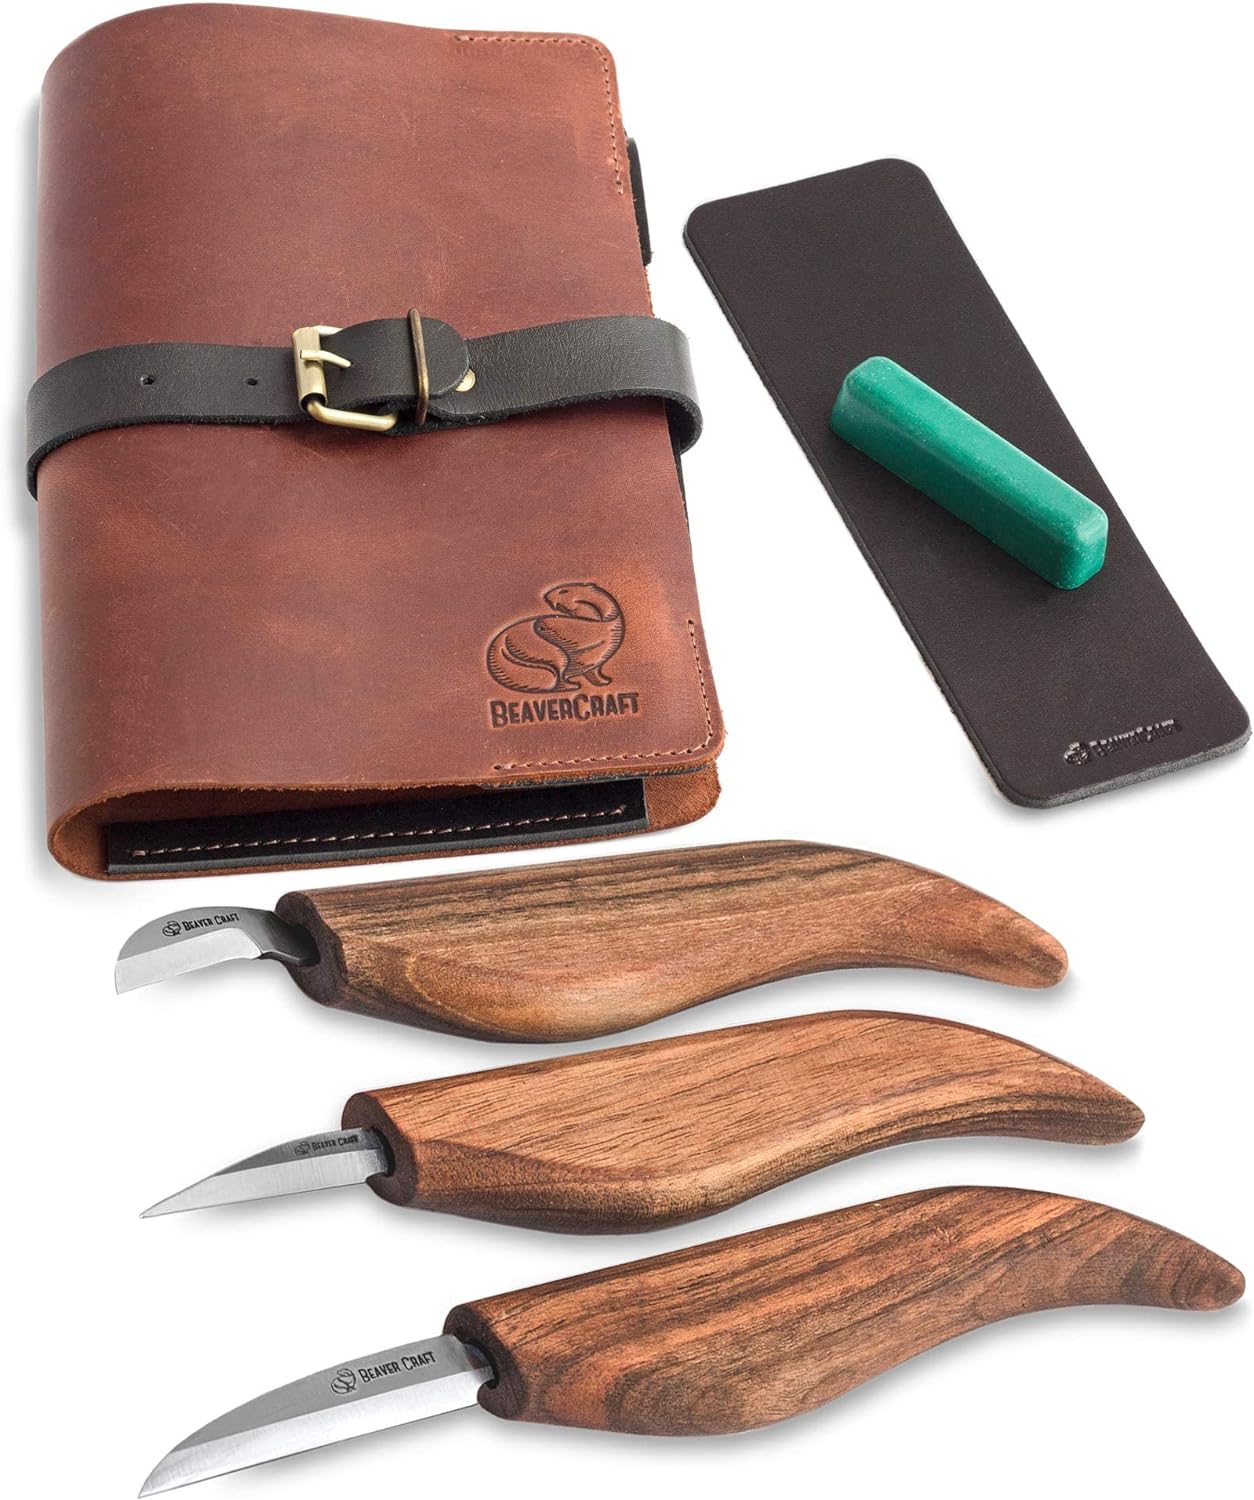 BeaverCraft Wood Carving Kit Deluxe Whittling Knives Set &#x26; Leather Strop for Carving Knife S15X Wood Carving Knives Set, Tools &#x26; Knife Strop with Polishing Compound Wood Whittling Kit and Leather Case